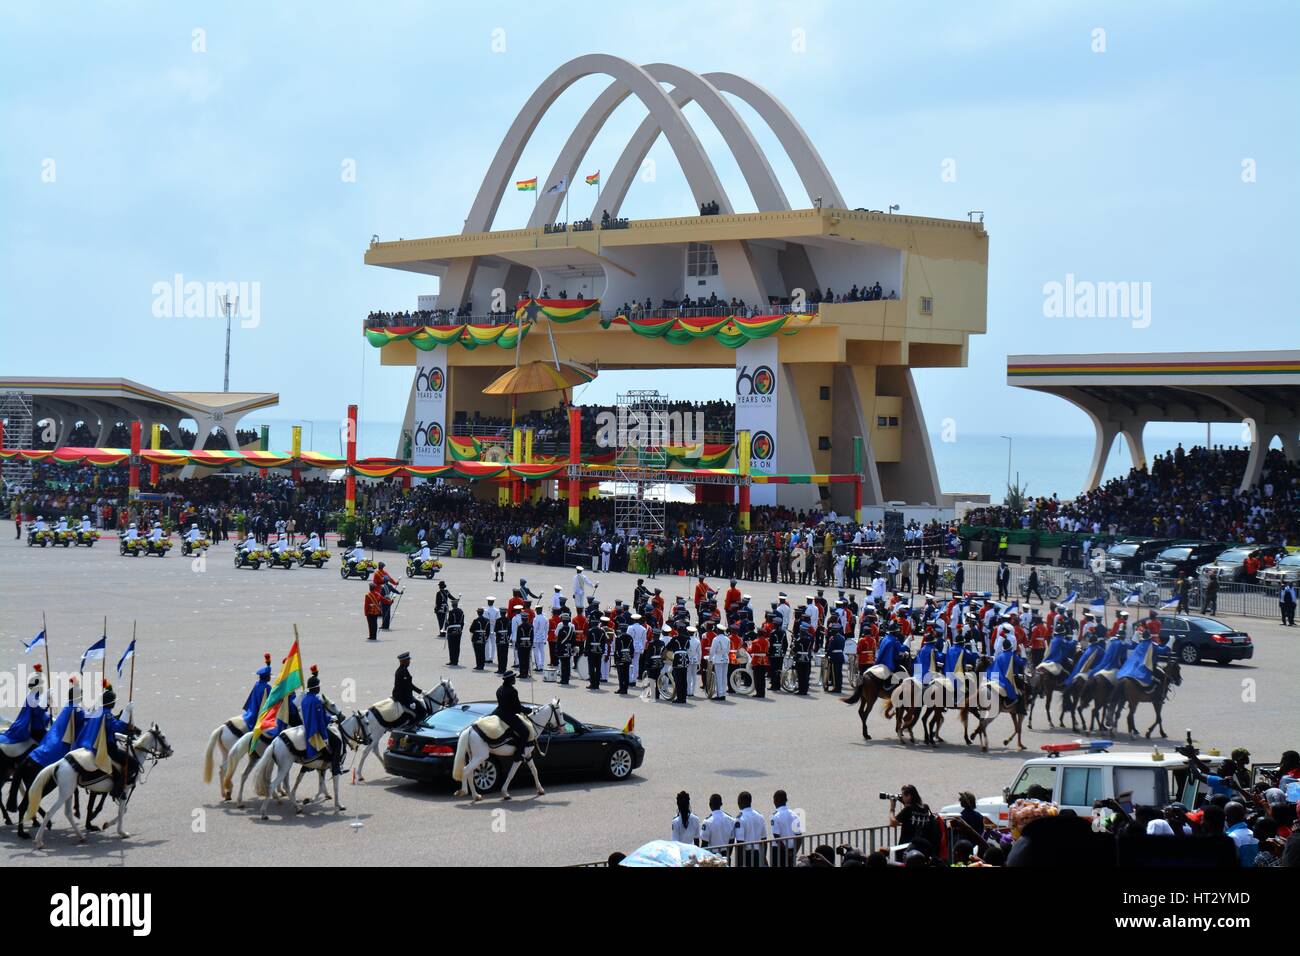 March 6, 2017 - Ghana`s 60 independence celebration... Ghana gained 1957 as first African country it`s freedom. Once a british colony, called Gold Coast. Stock Photo